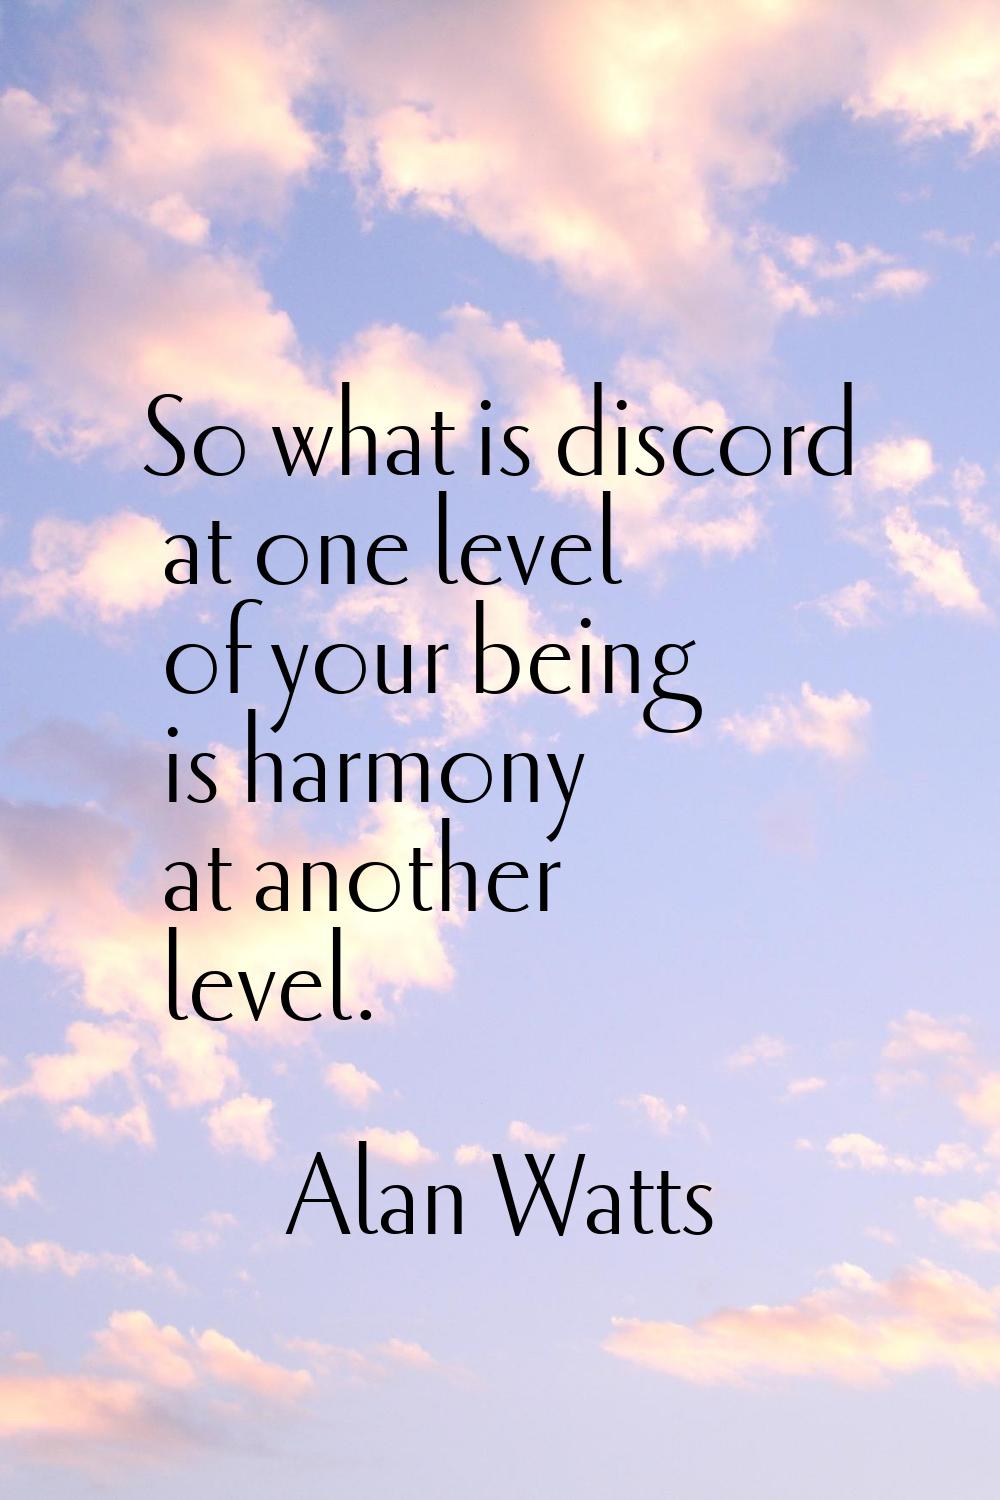 So what is discord at one level of your being is harmony at another level.